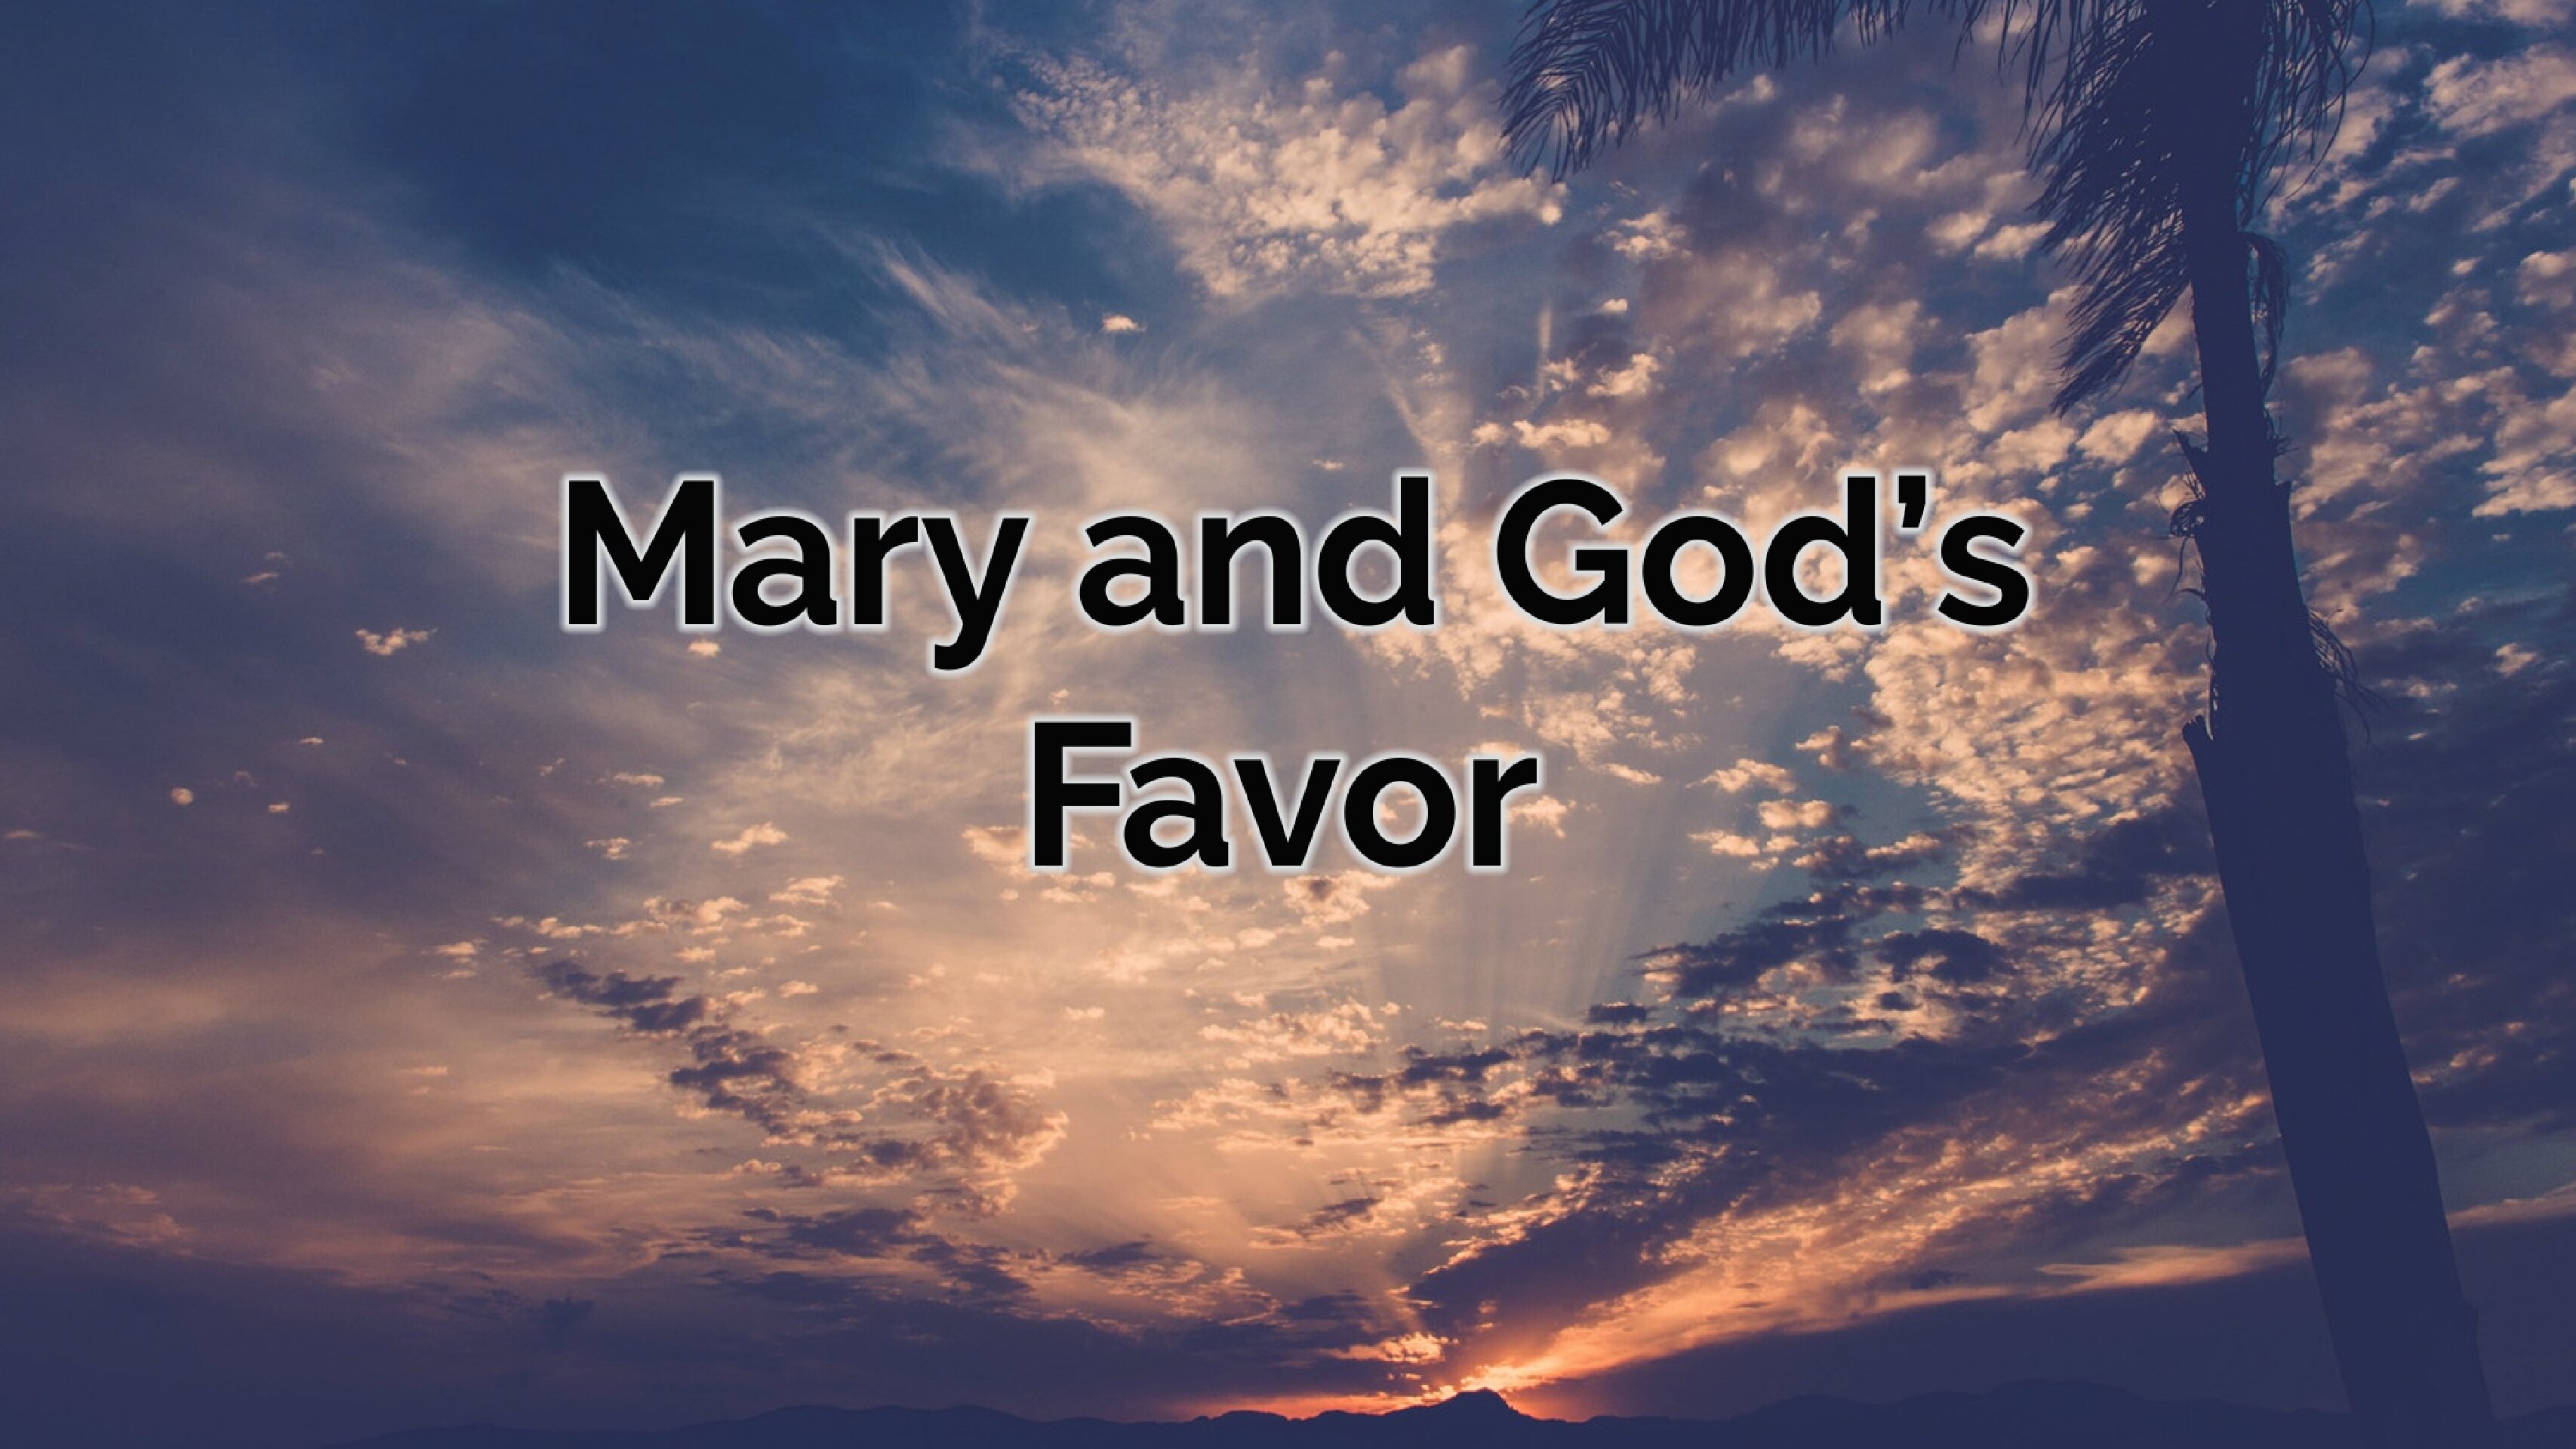 Mary and God’s Favor